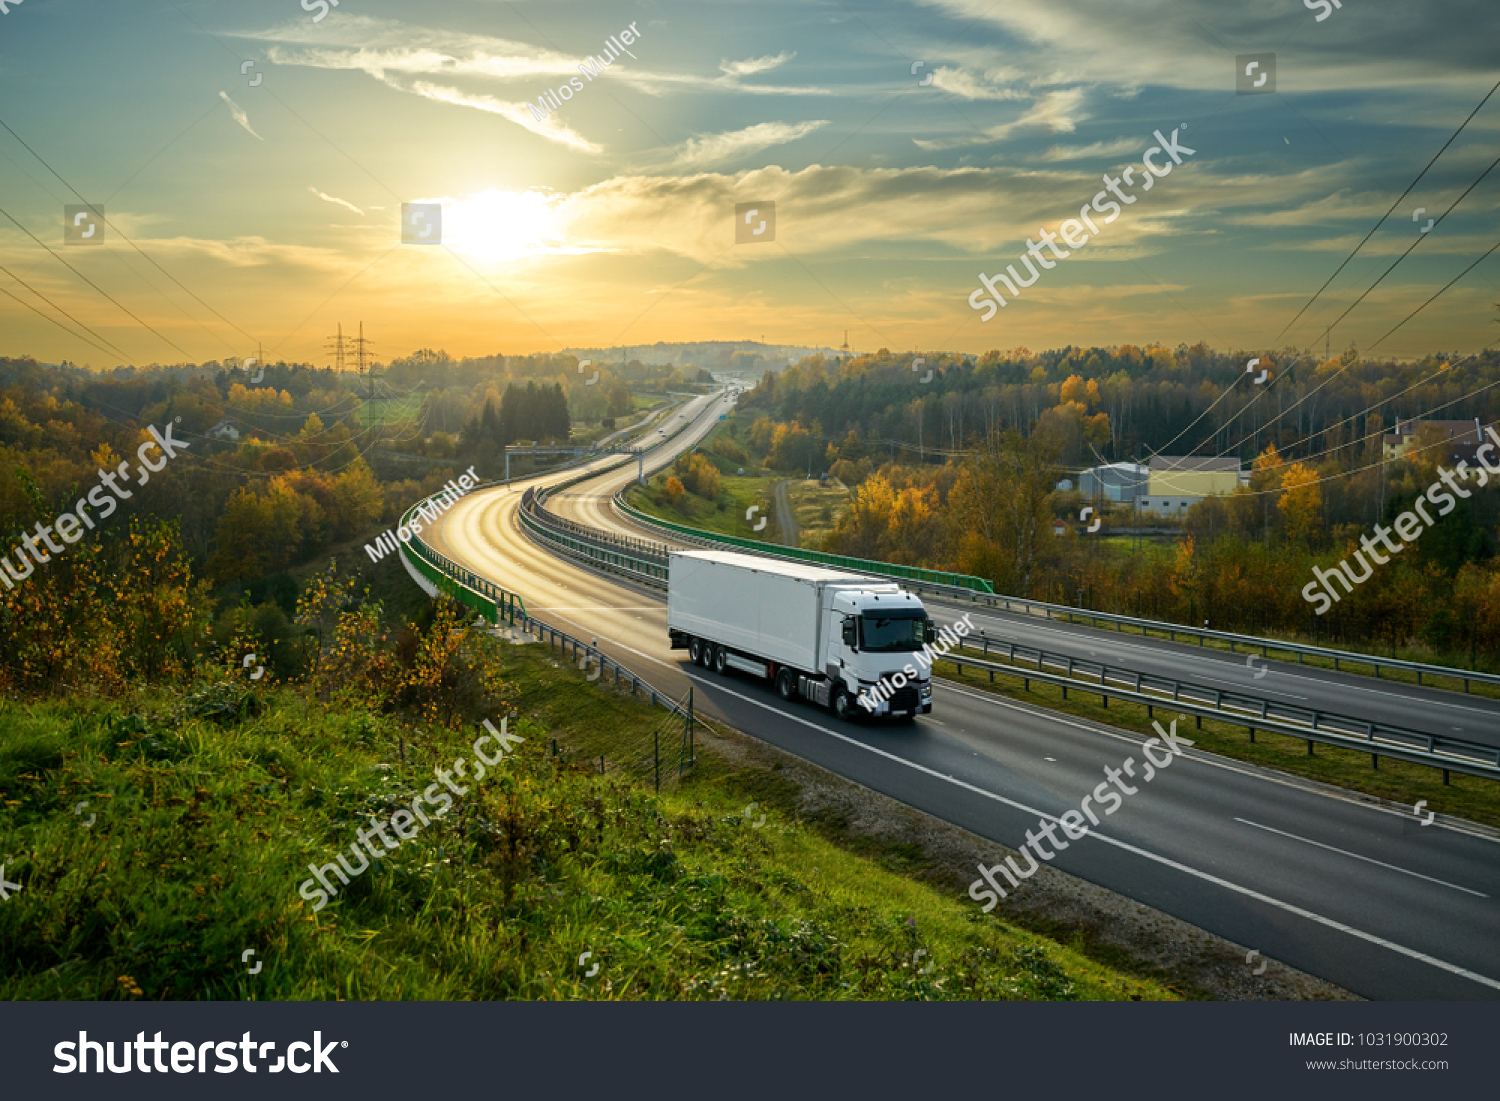 White truck driving on the highway winding through forested landscape in autumn colors at sunset #1031900302